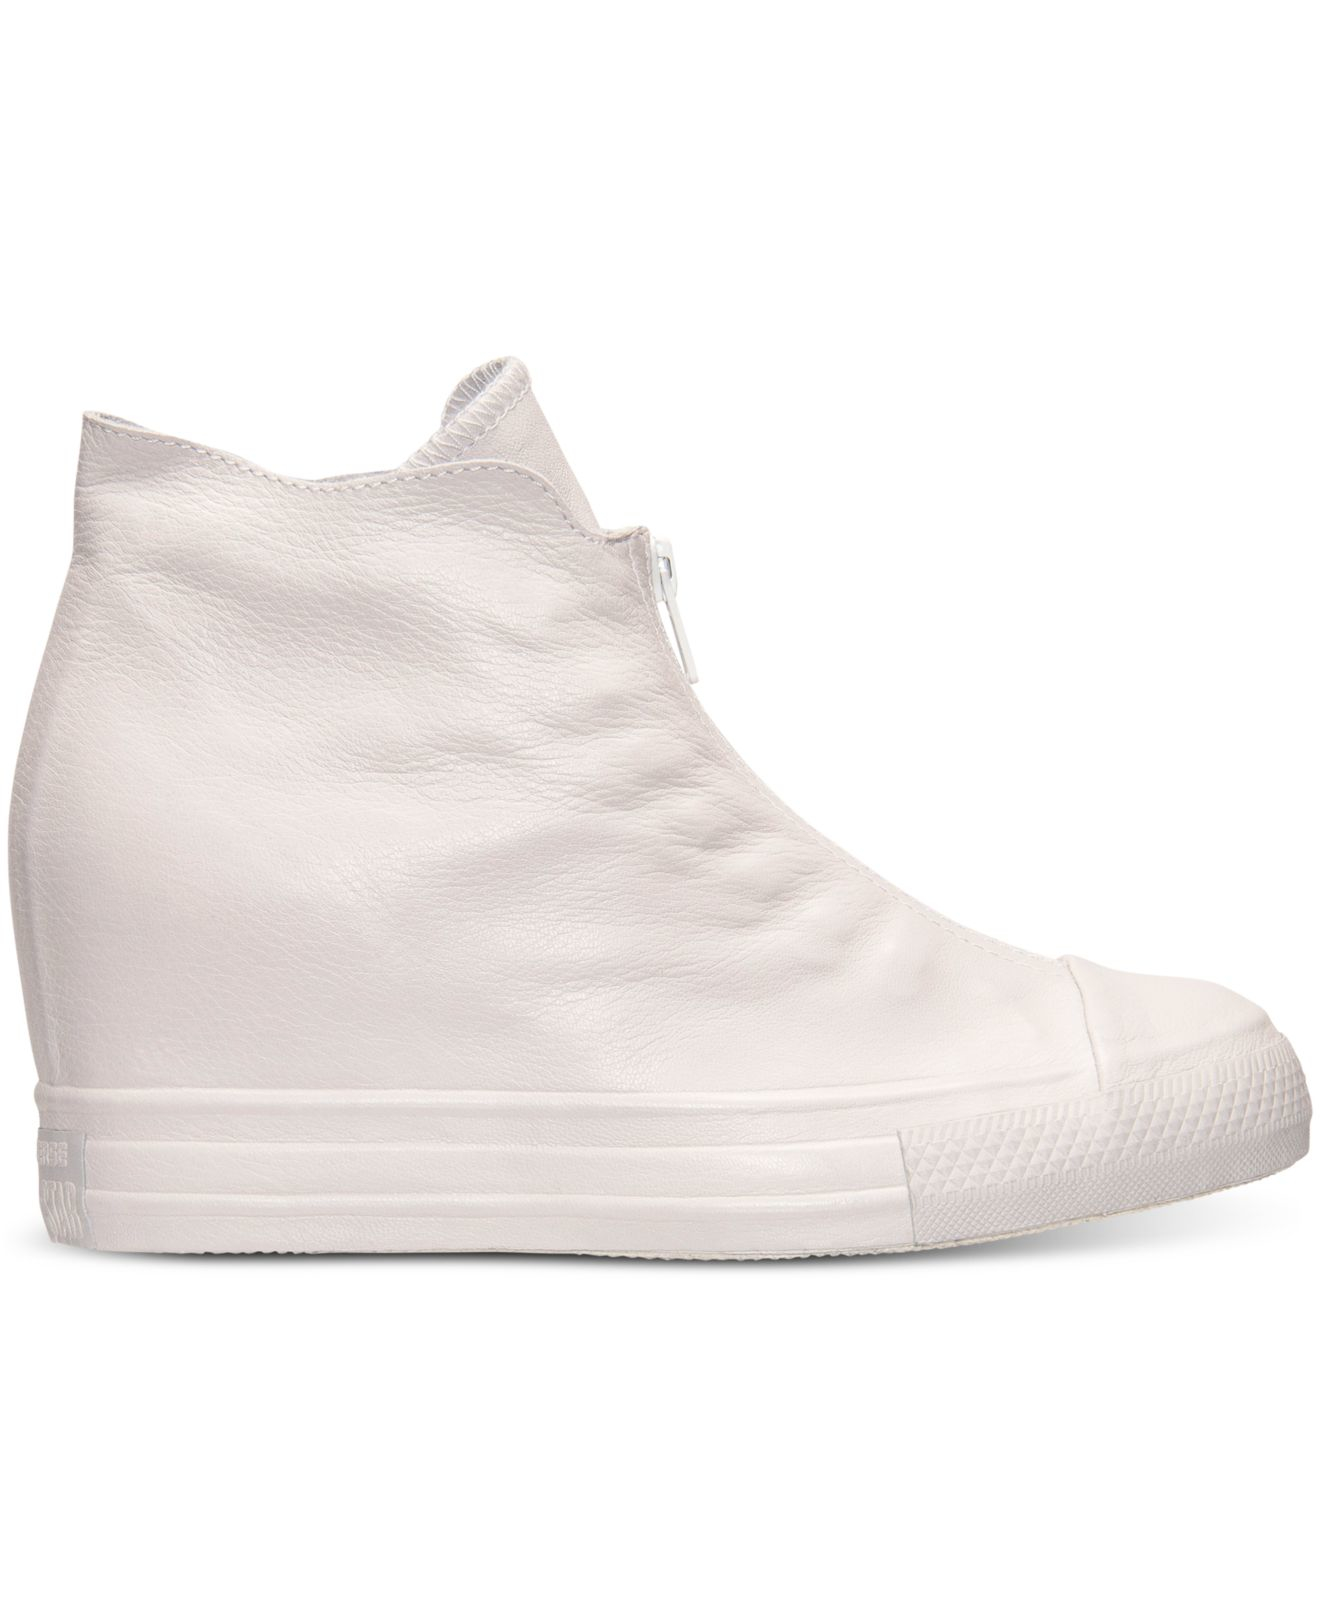 Converse Women's Chuck Taylor Lux Shroud Casual Sneakers From ... لصف